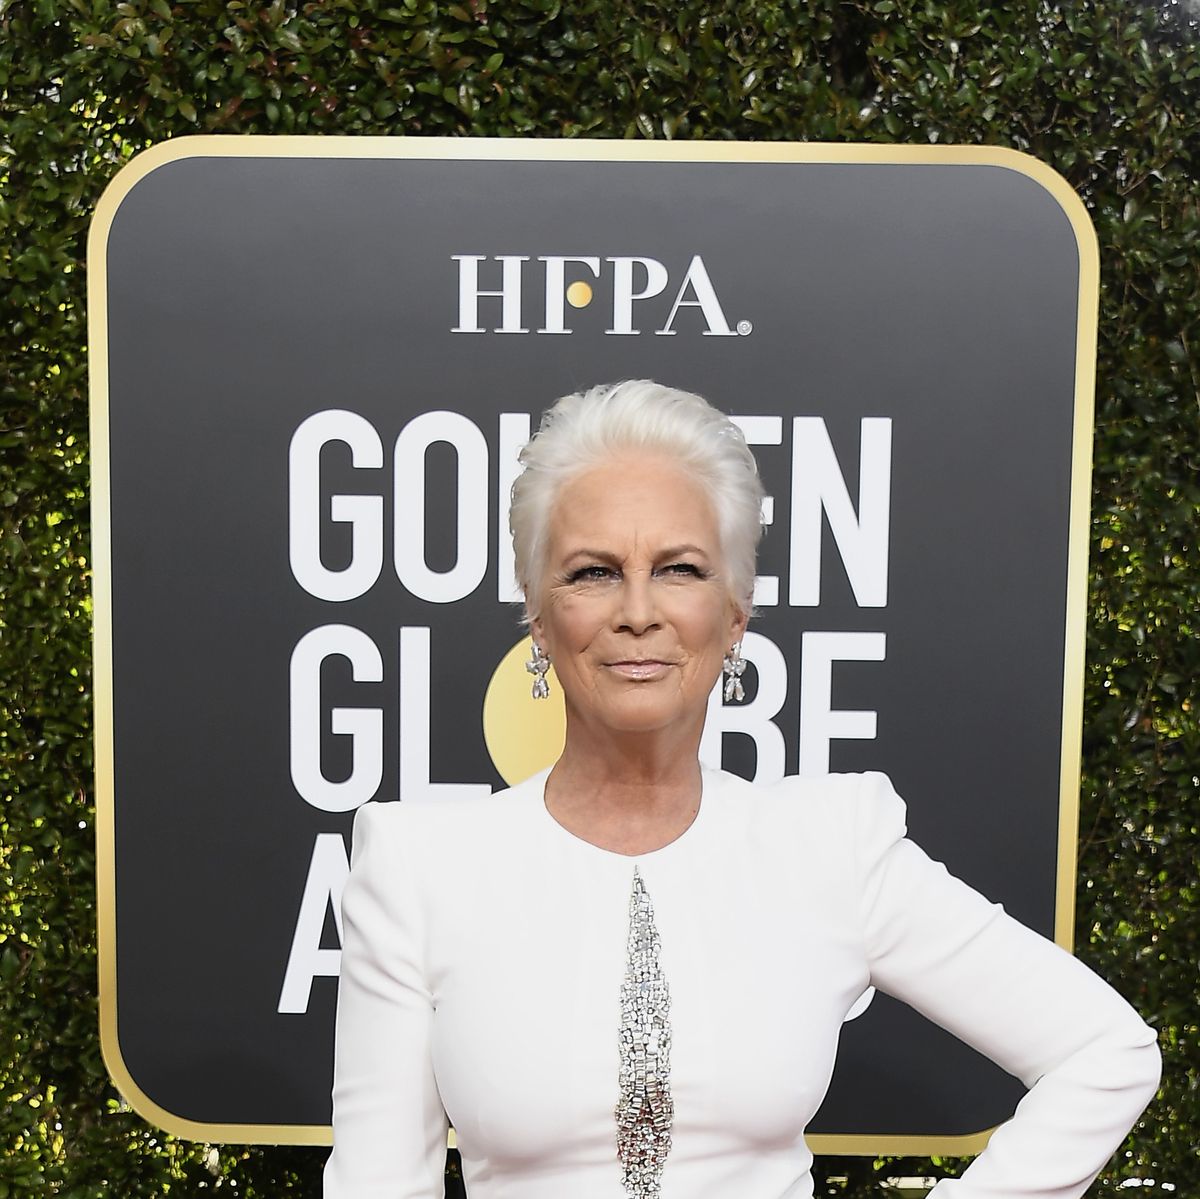 Jamie Lee Curtis Crushed the 2019 Golden Globes Red Carpet